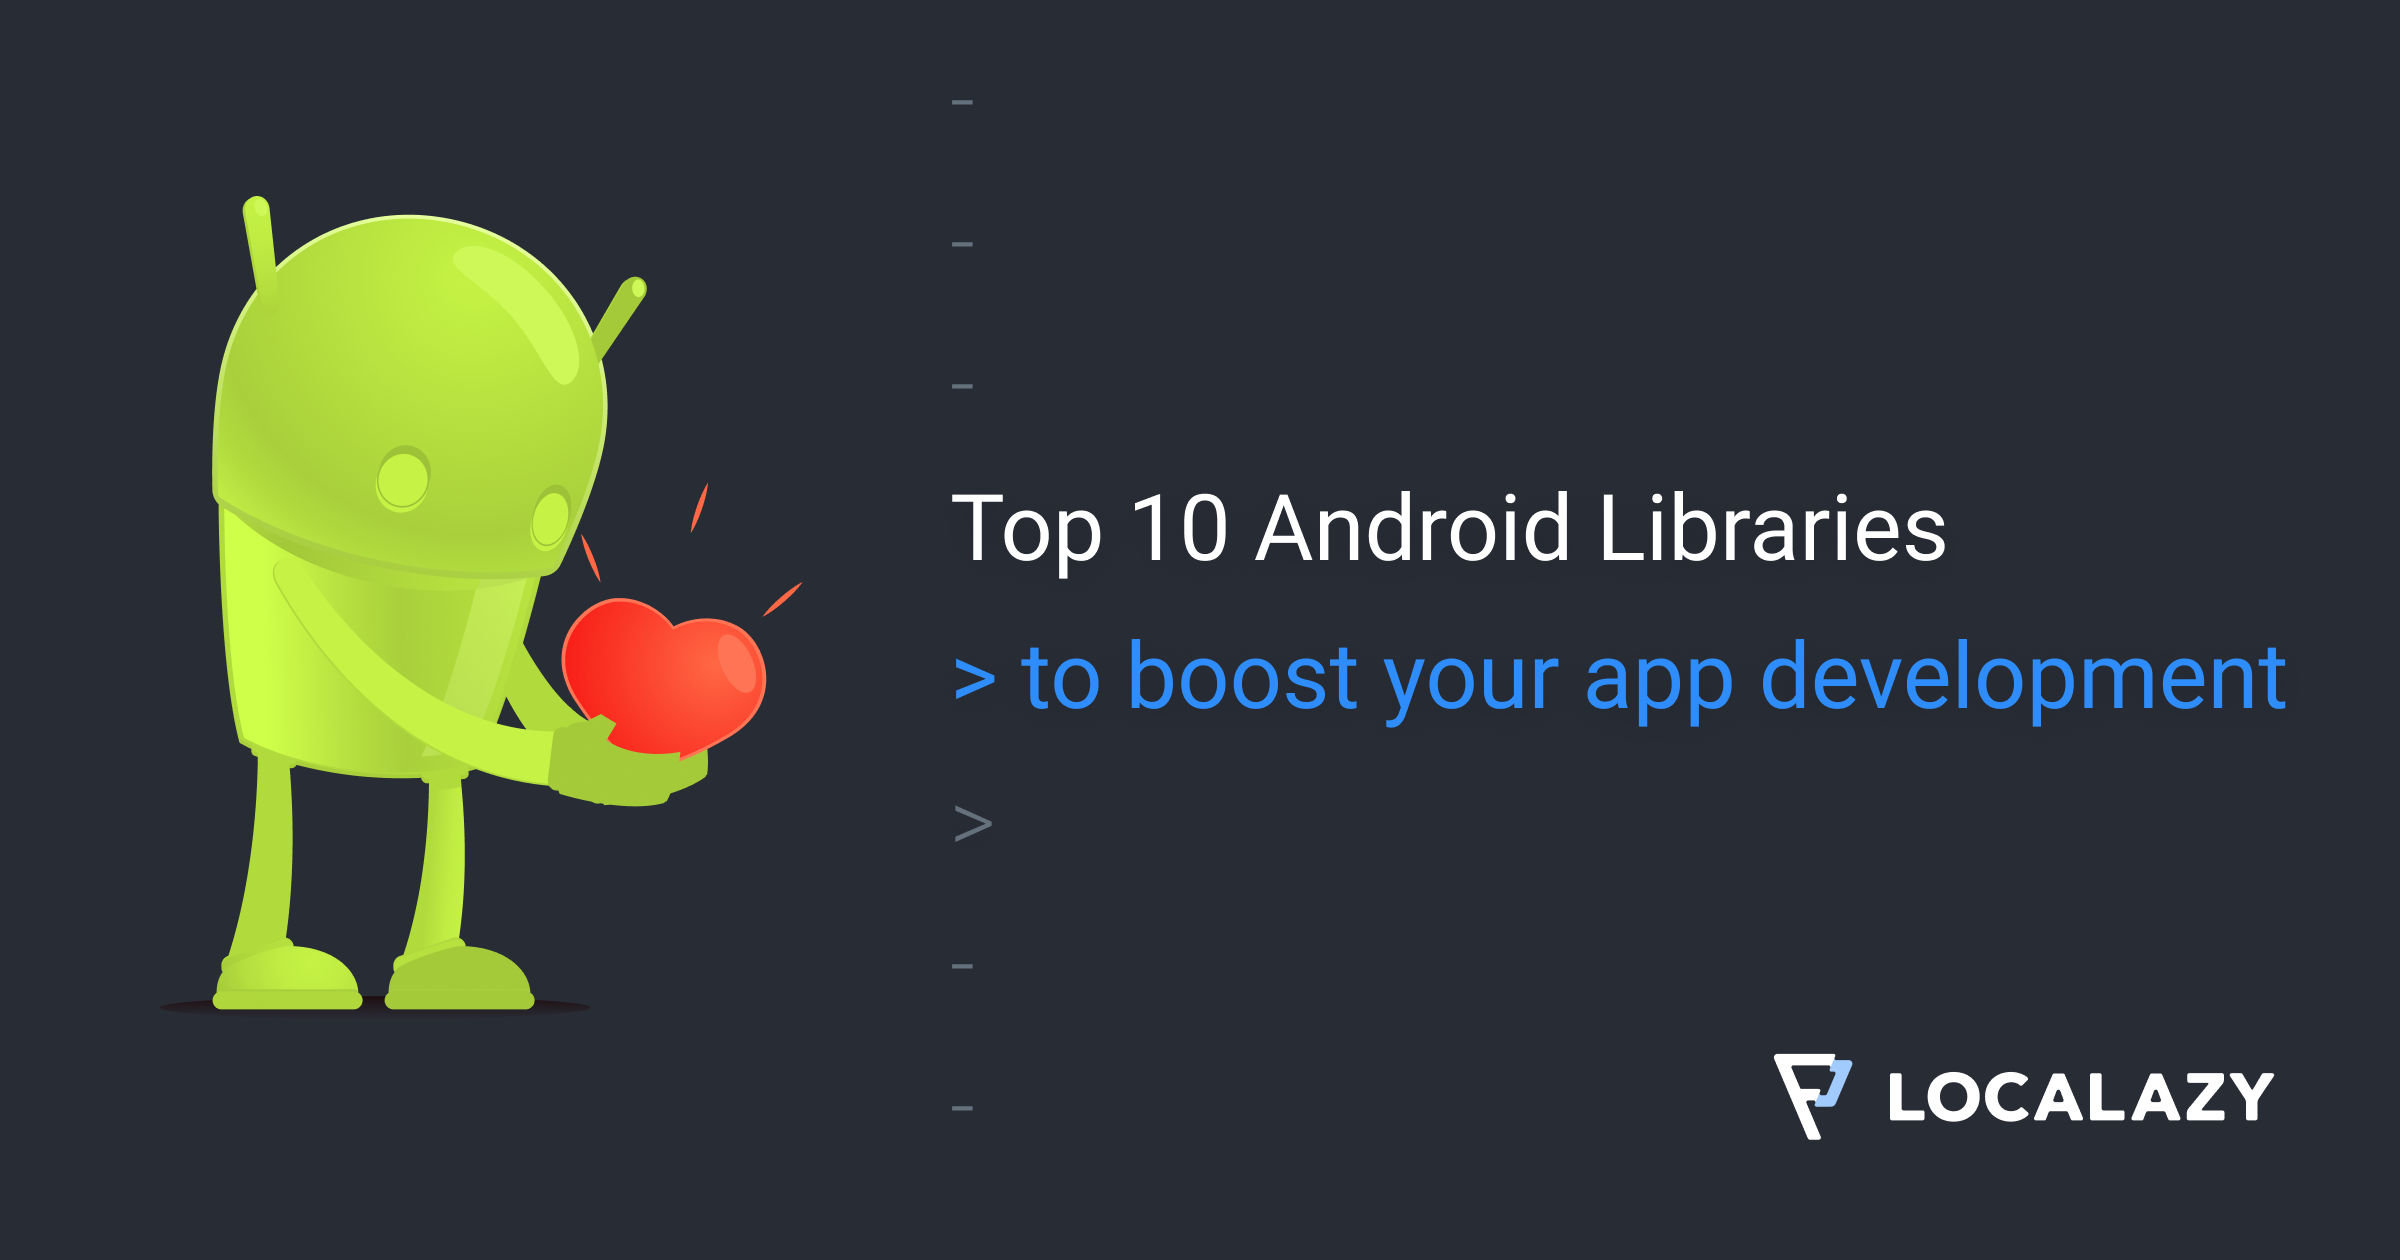 Top 10 Android Libraries to boost your development in 2022